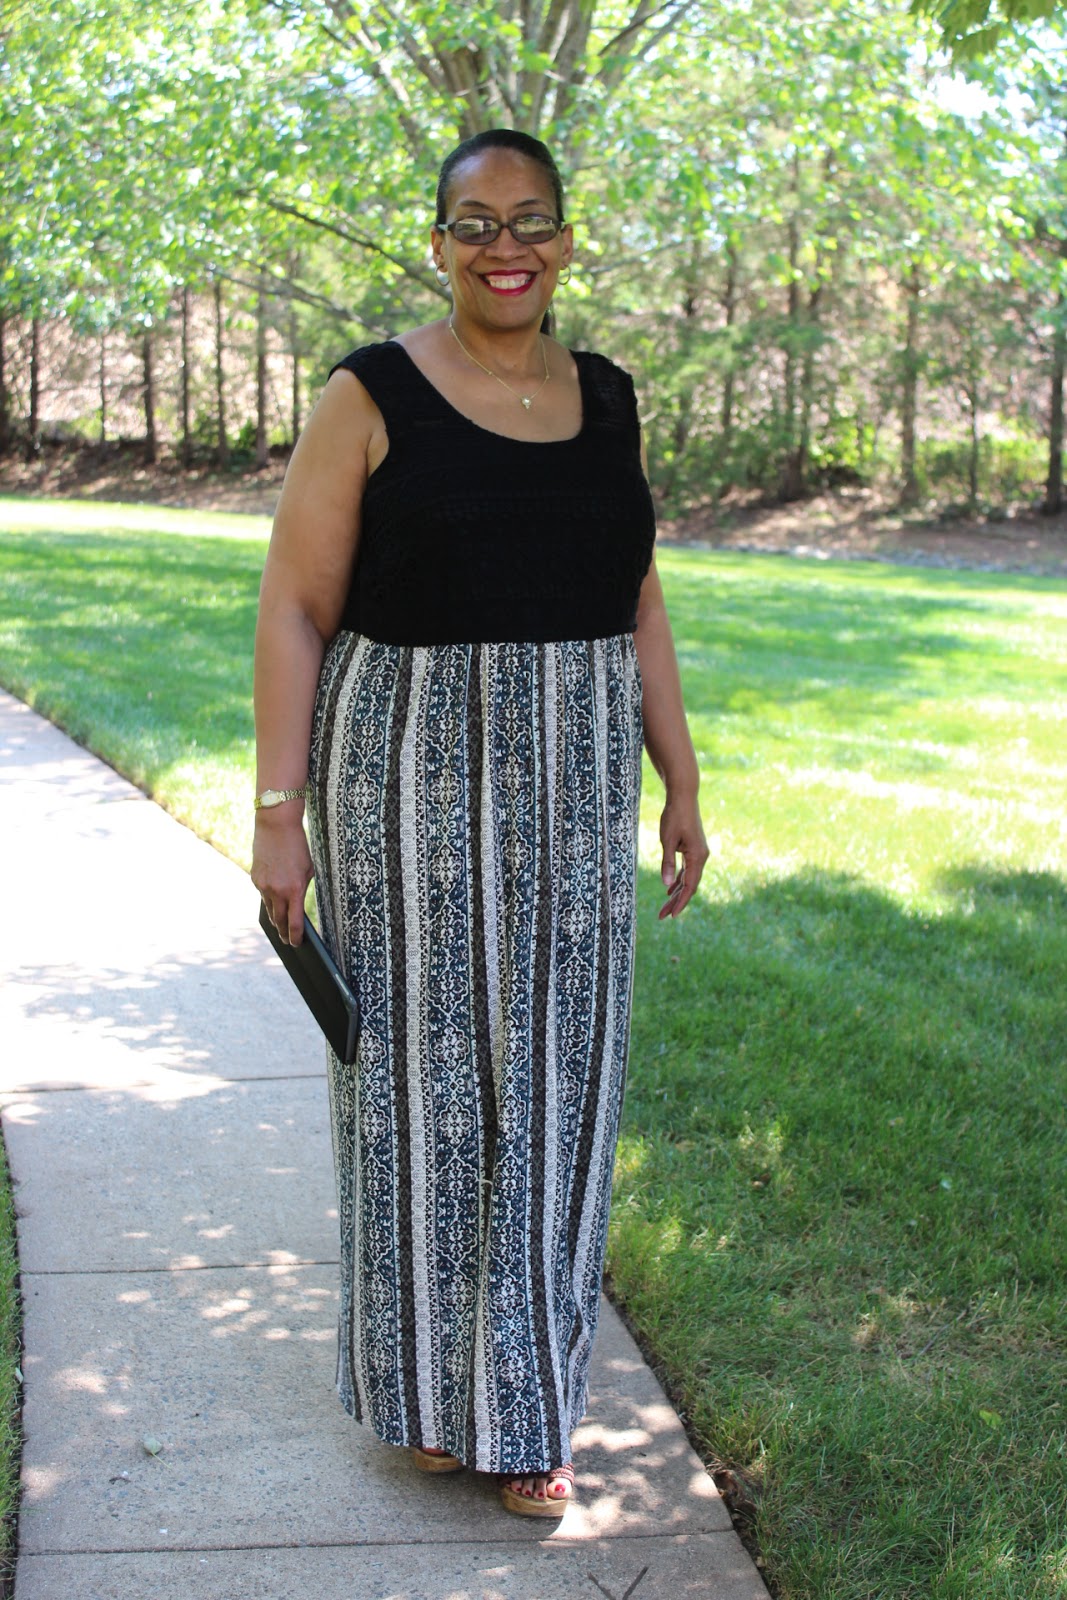 Diary of a Sewing Fanatic: Remaking A RTW Dress